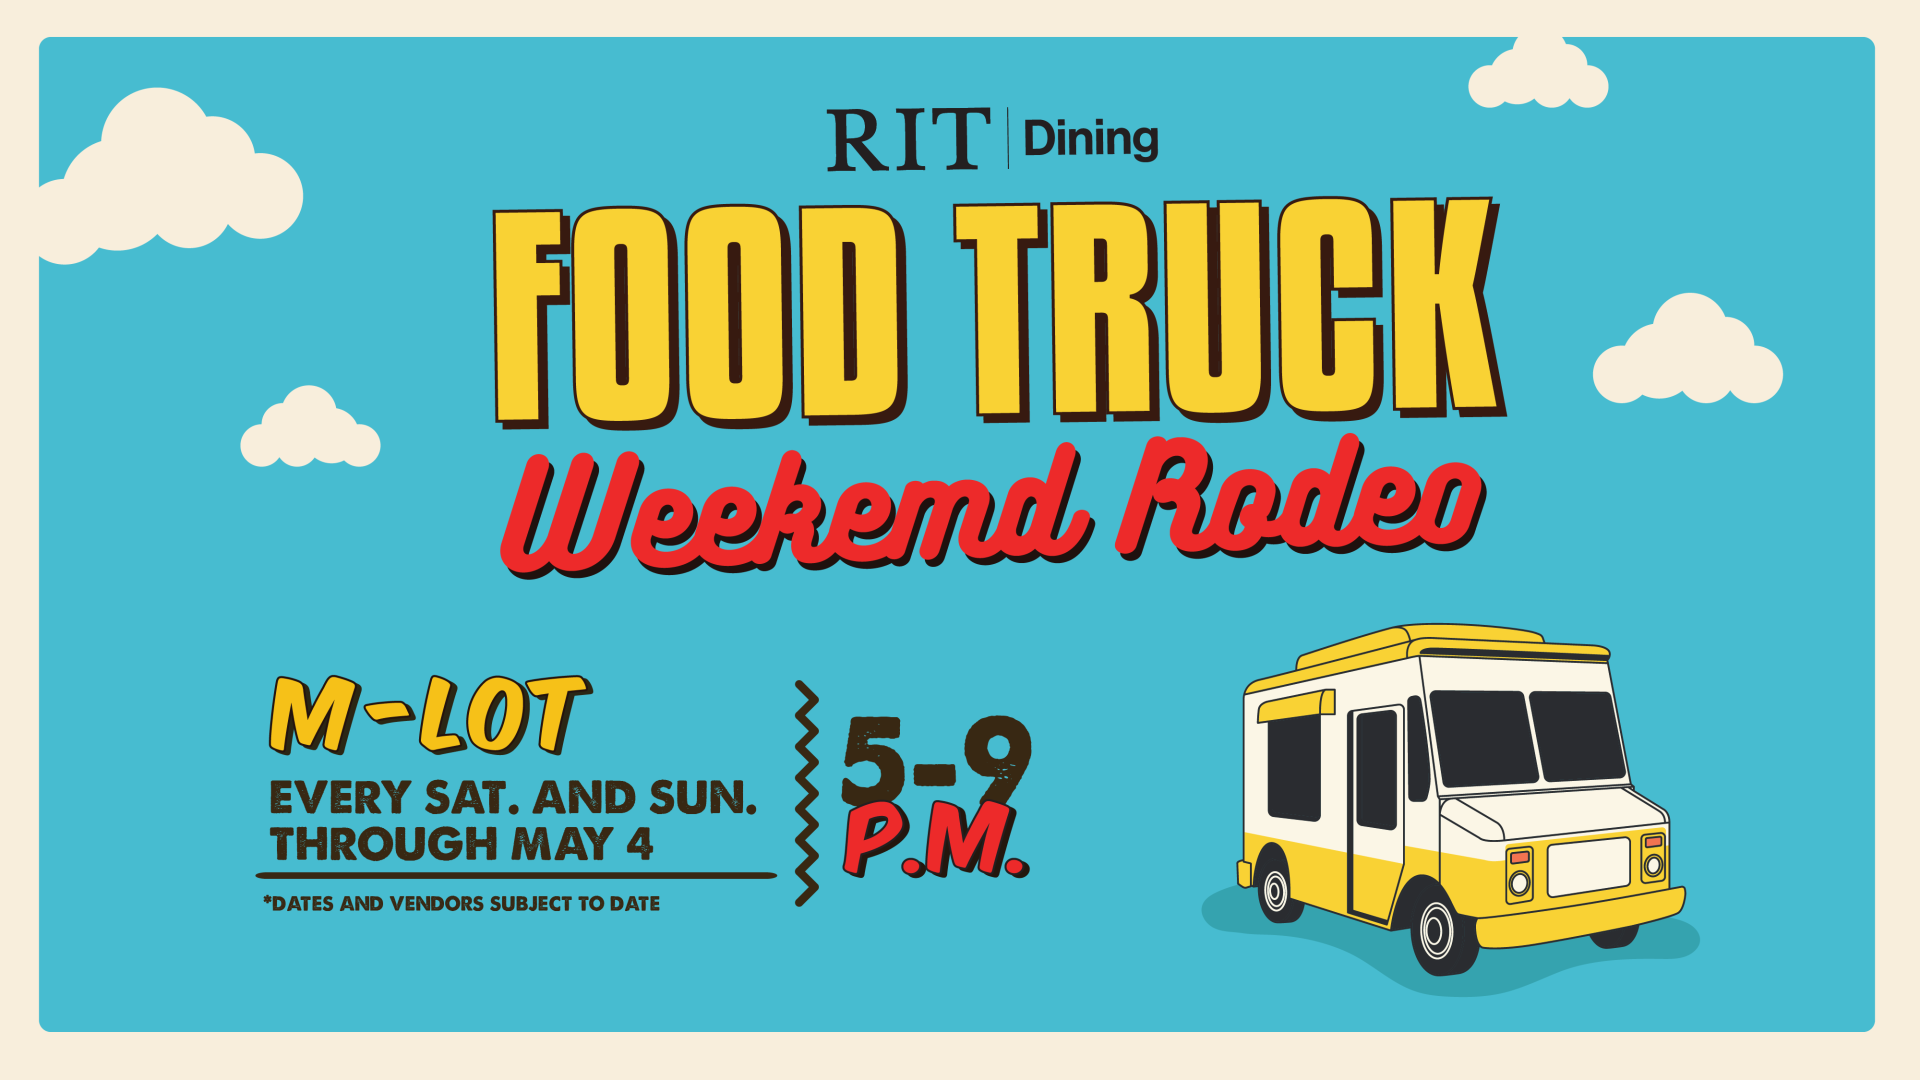 Bright Blue skies with clouds and event details with a yellow food truck